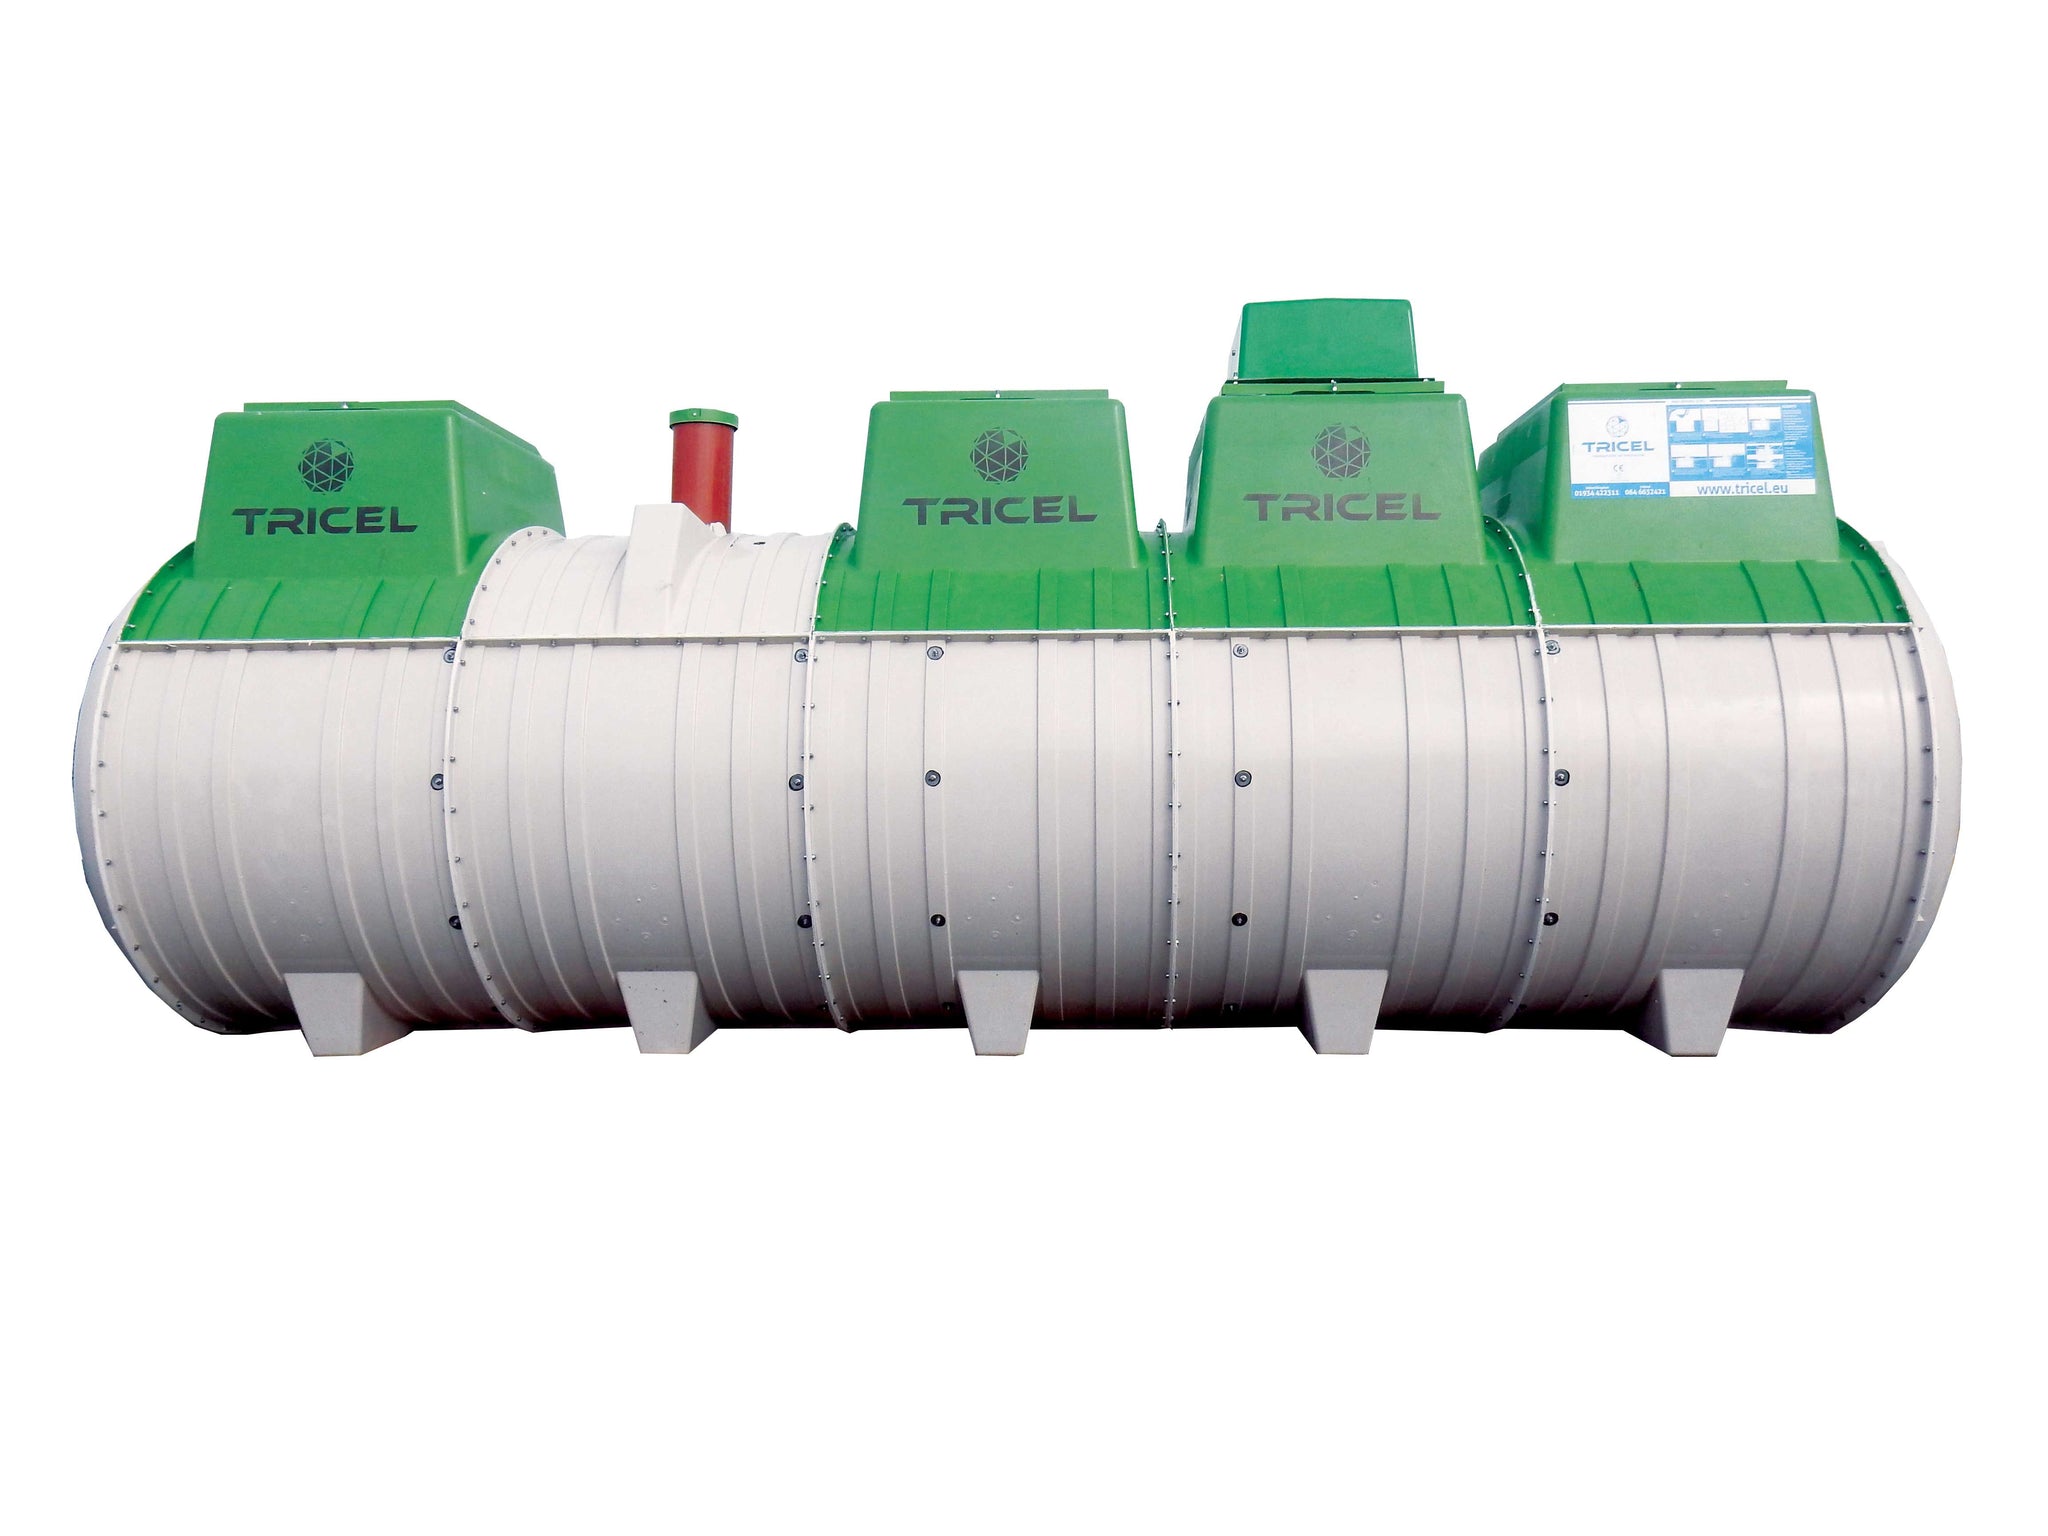 Tricel Novo UK24 Sewage Treatment System (up to 24 Person)